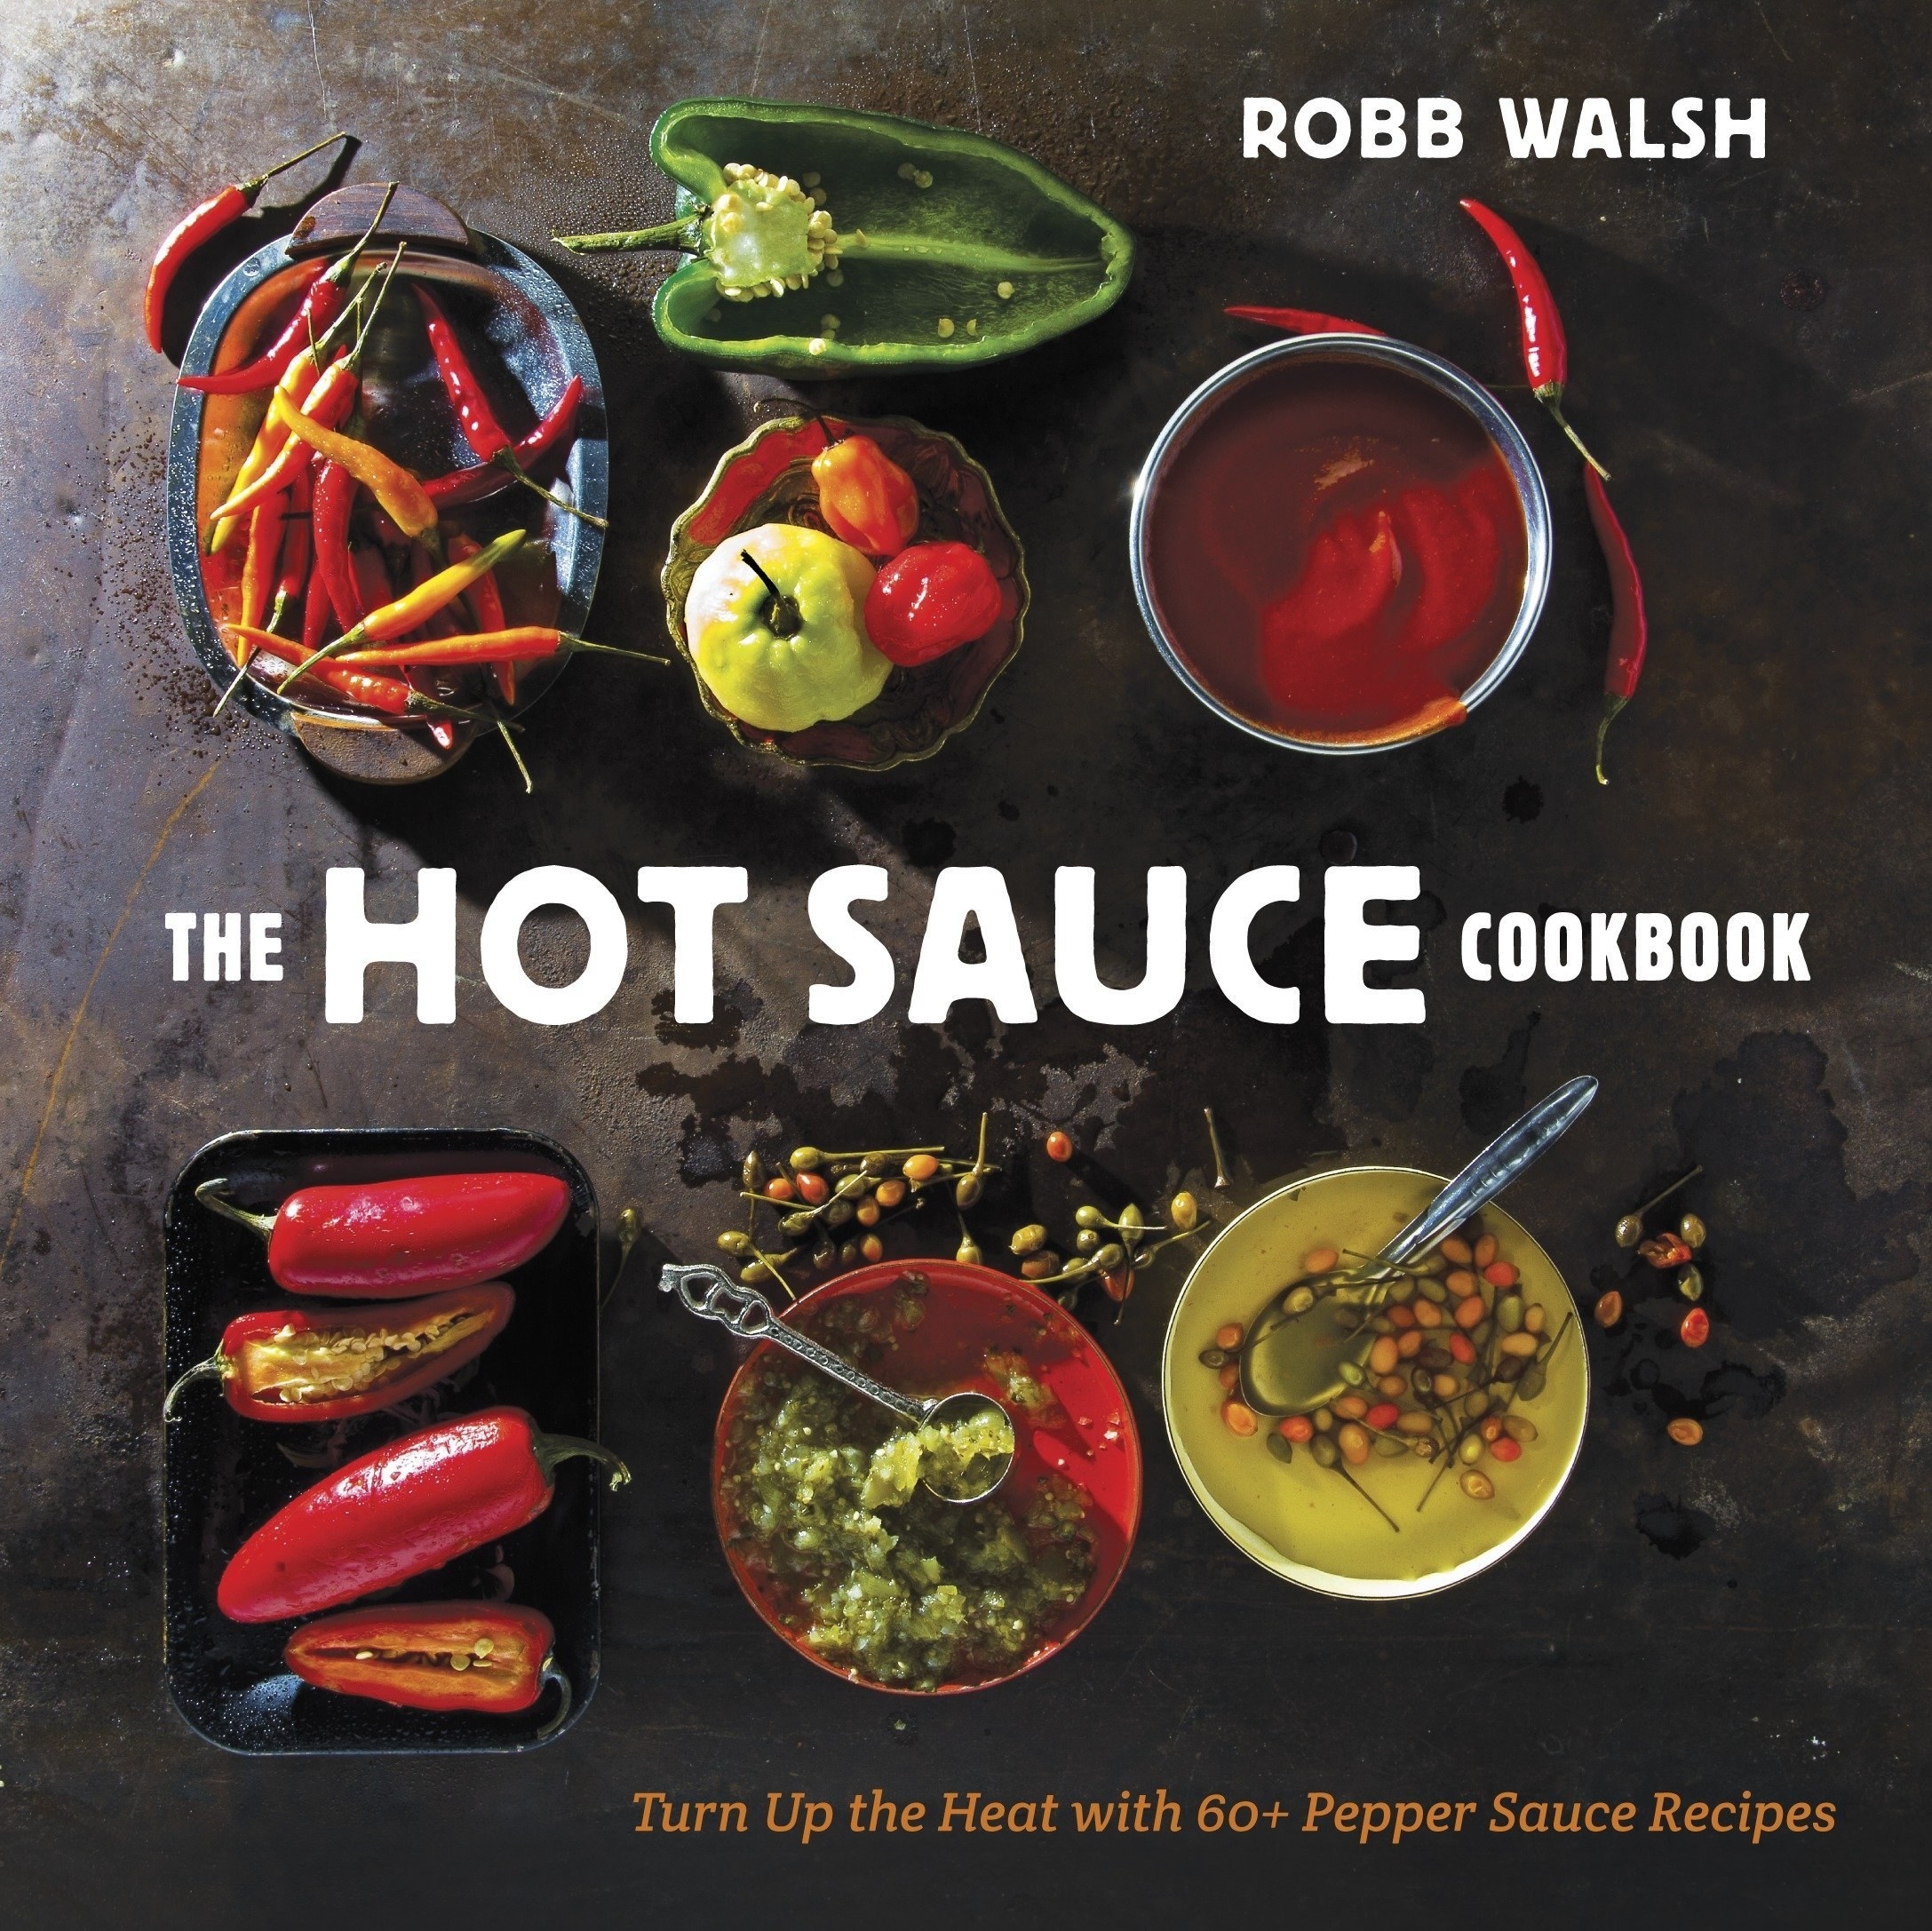 The front cover of the hot sauce cookbook